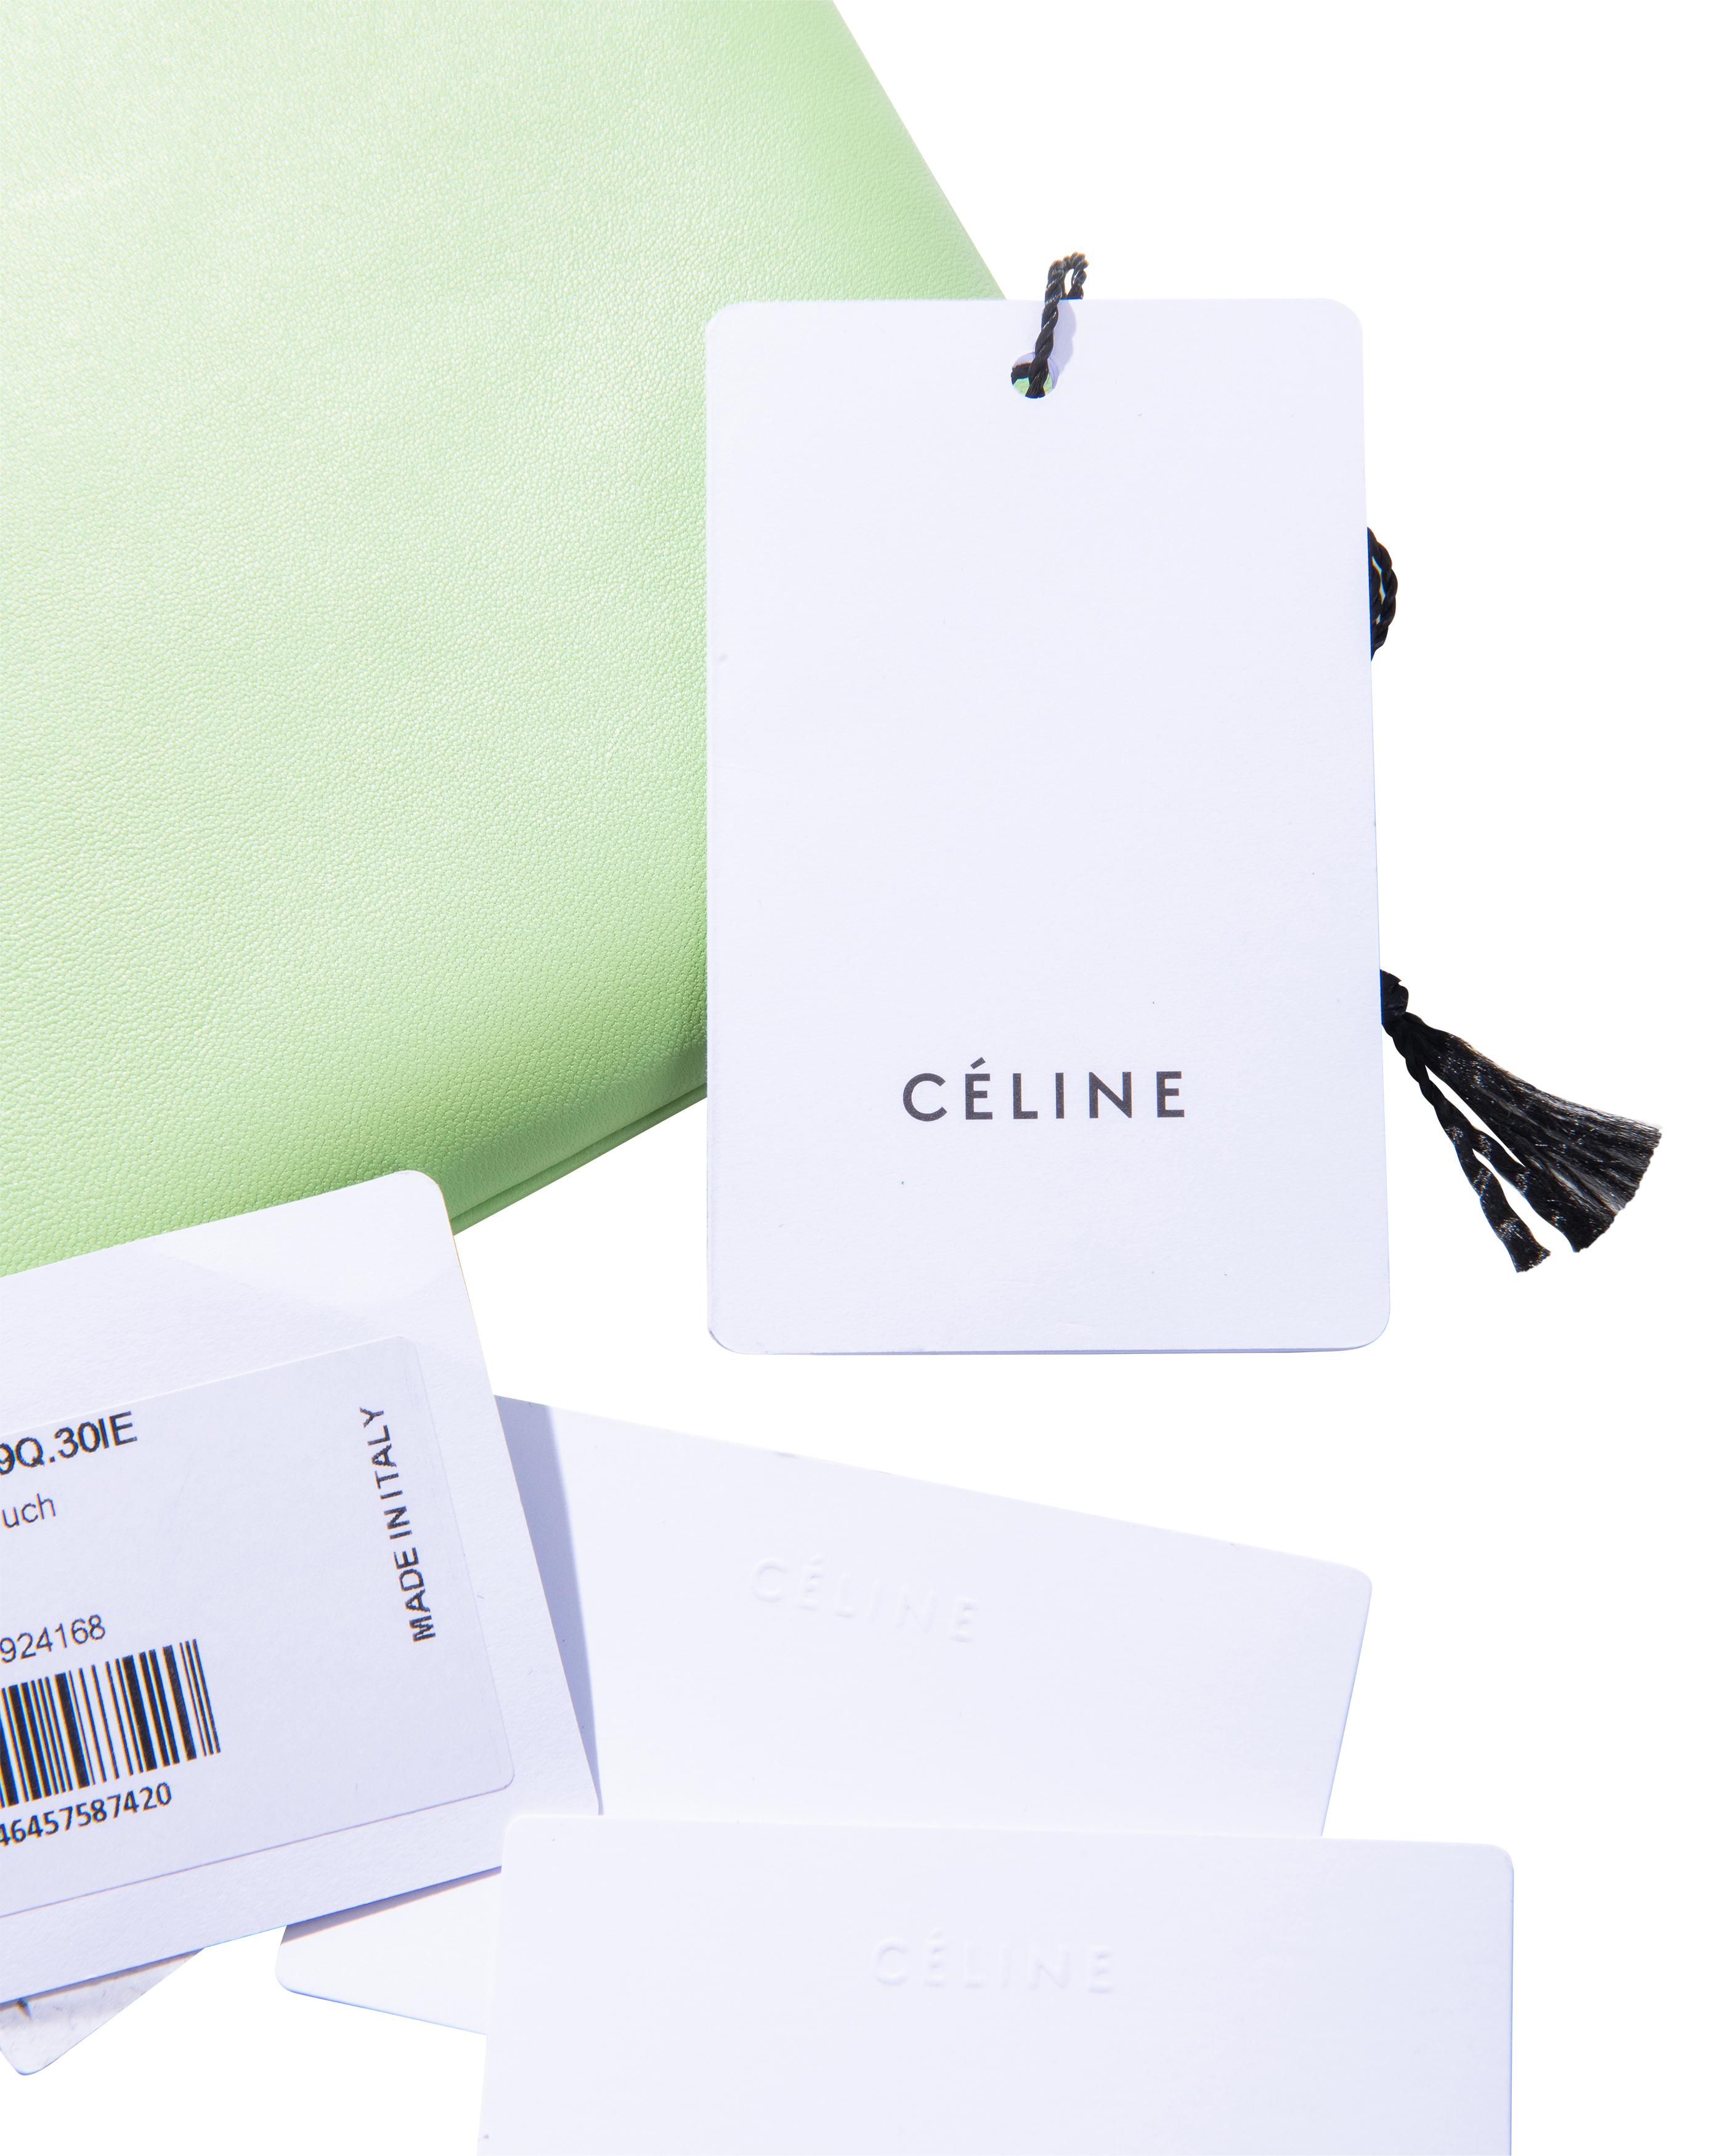 S/S 2018 Old Céline by Phoebe Philo PVC Handbag with Green Interior Clutch For Sale 10